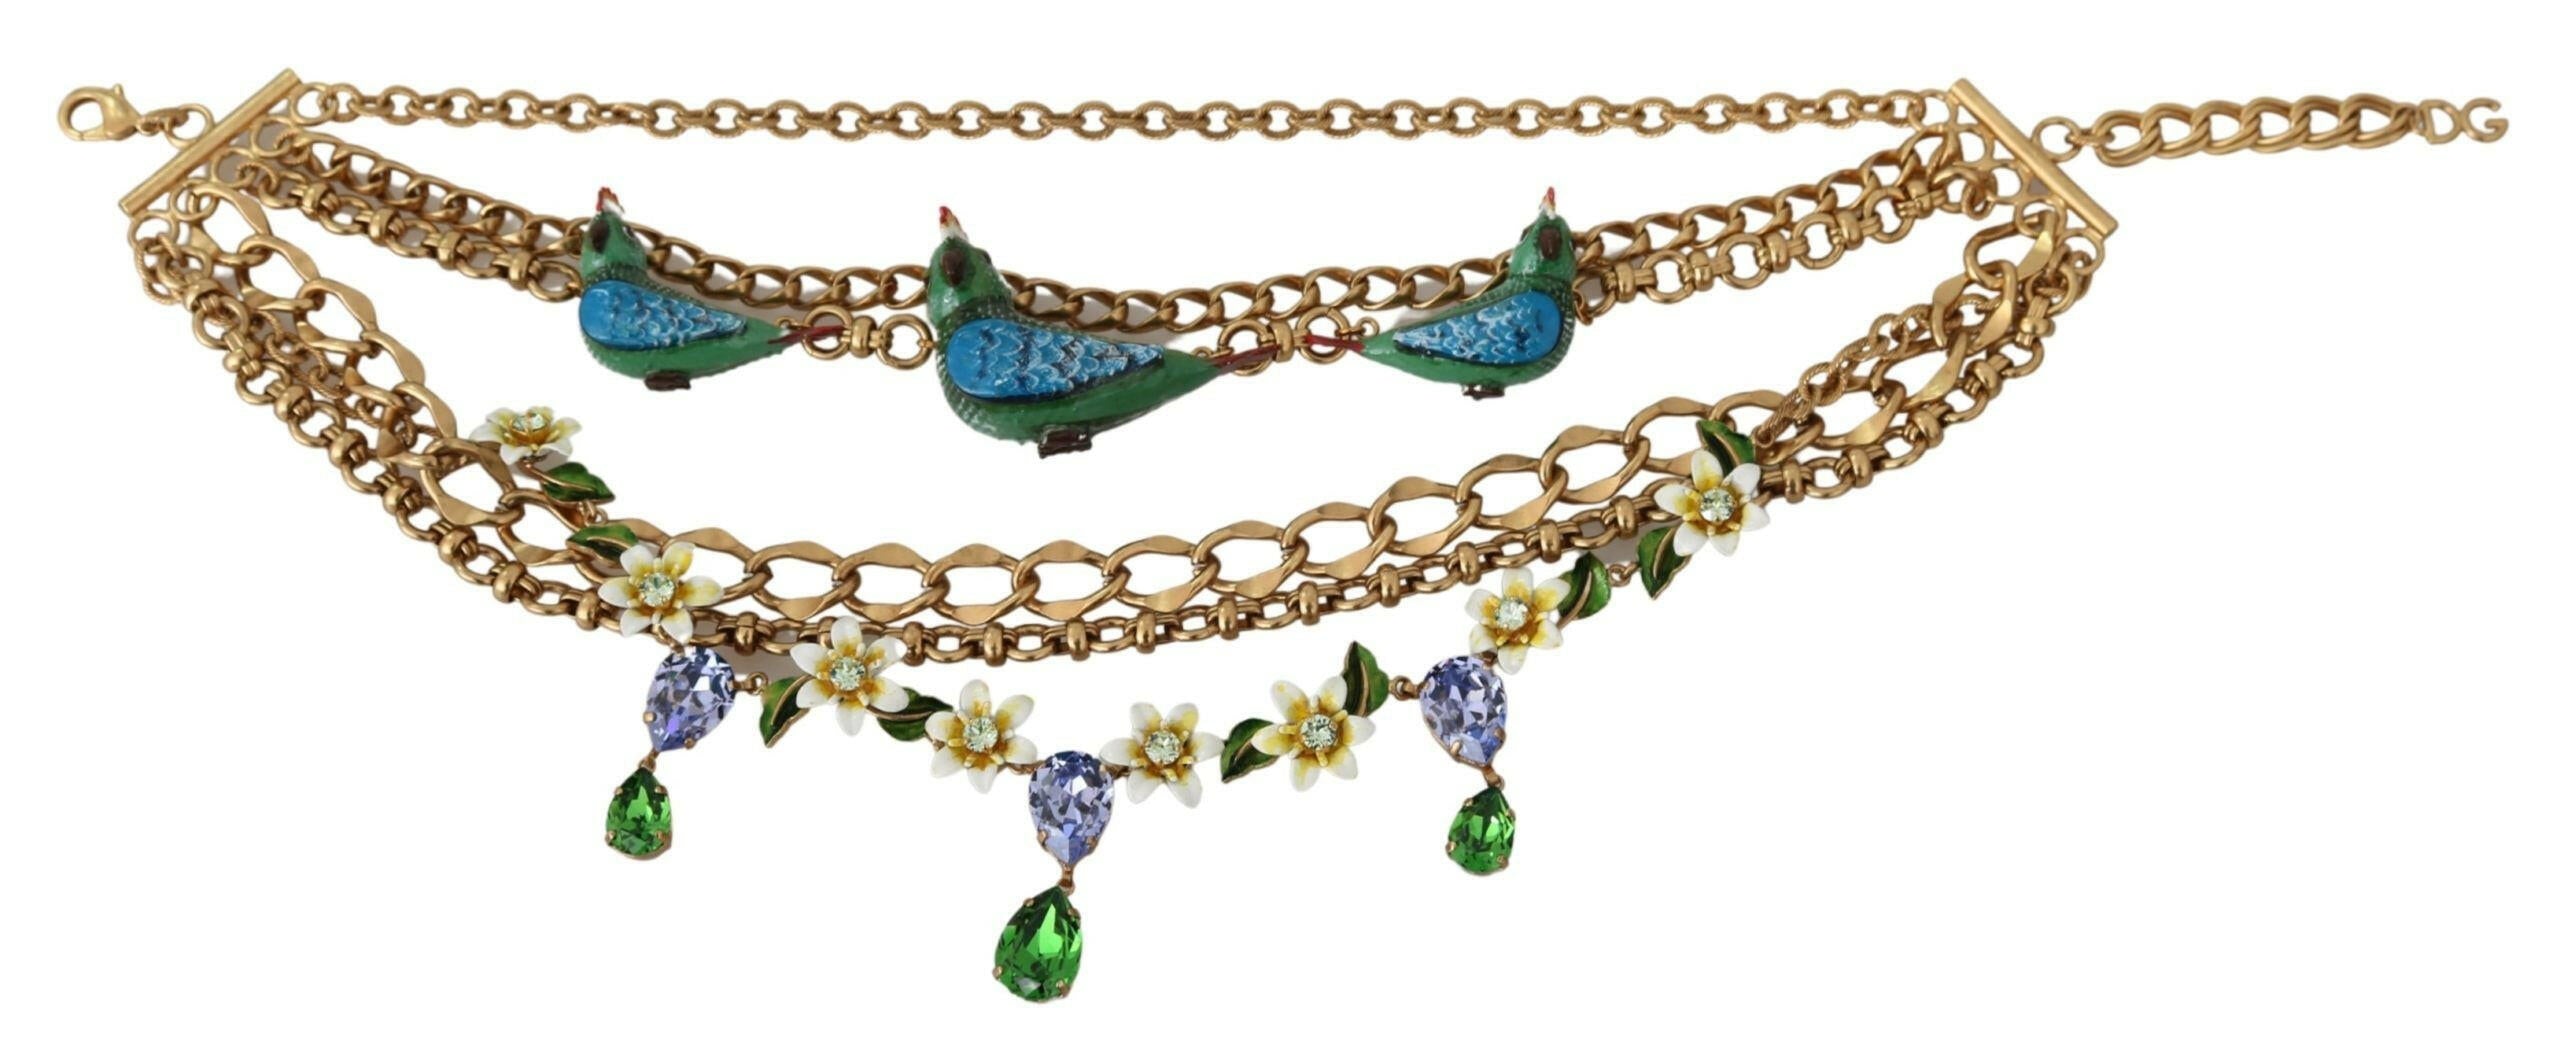 Dolce & Gabbana Gold Parrot Crystal Floral Charm Statement Necklace - GENUINE AUTHENTIC BRAND LLC  